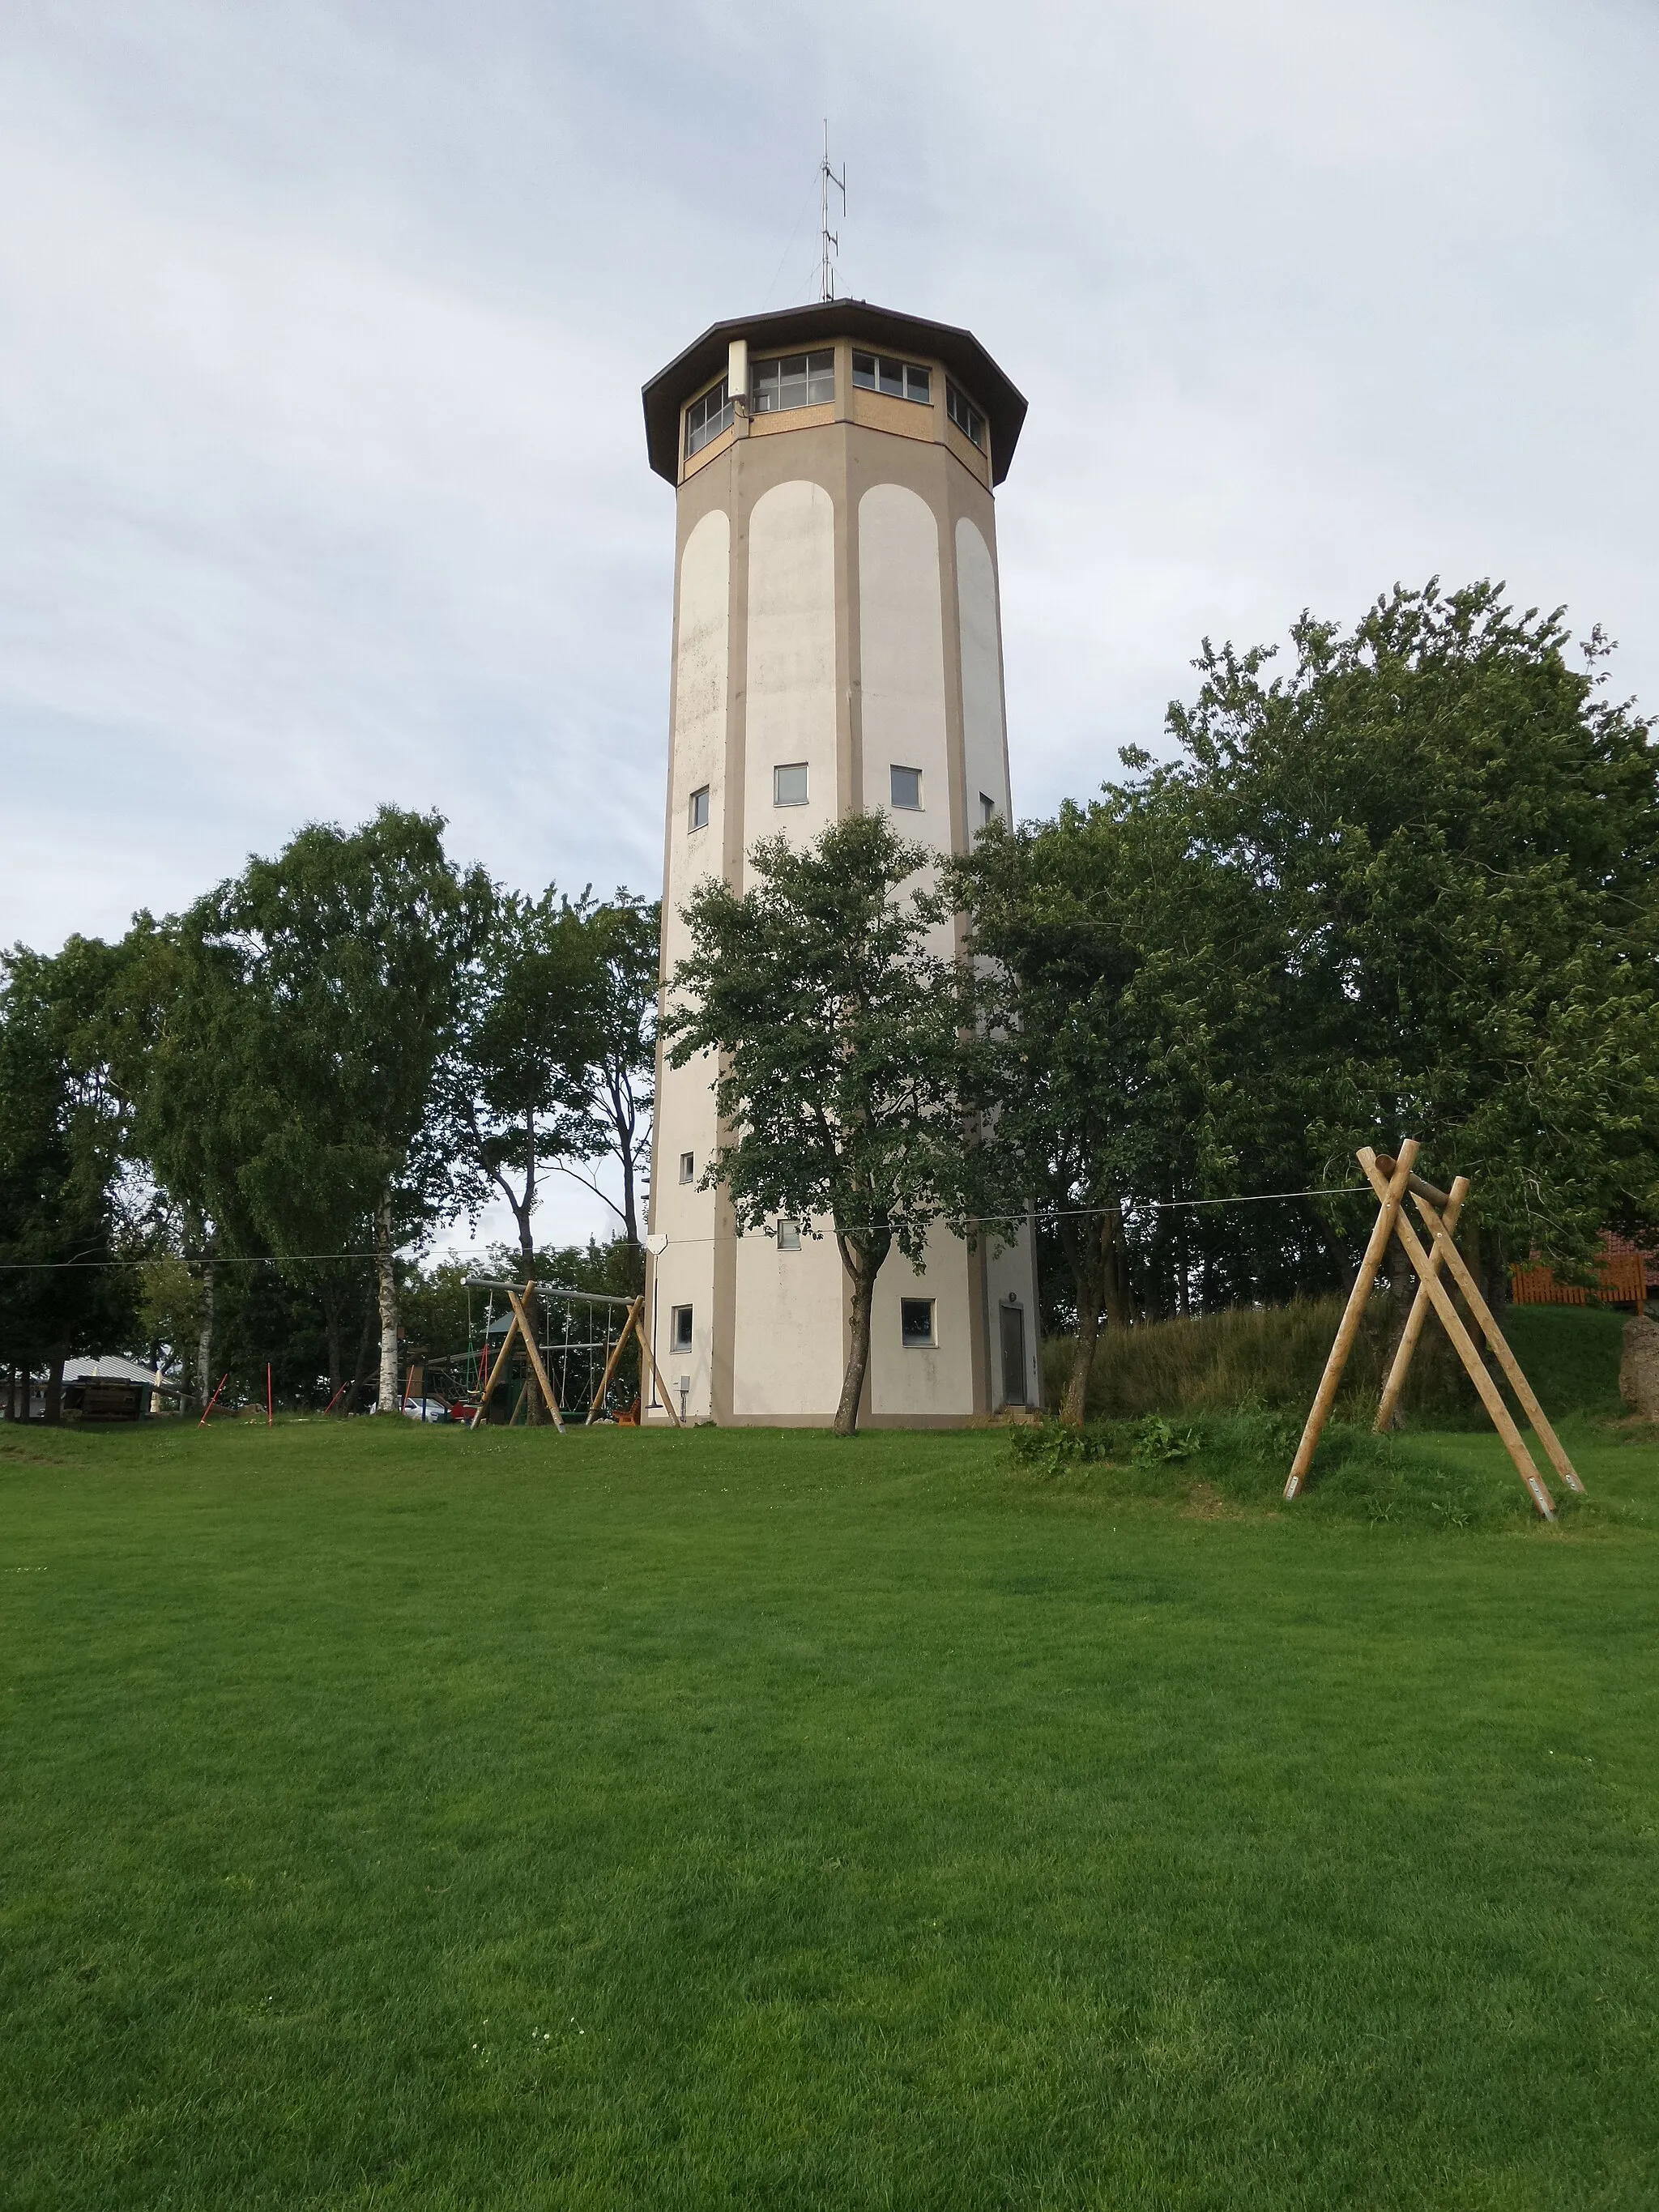 Photo showing: The water tower of Ennahofen